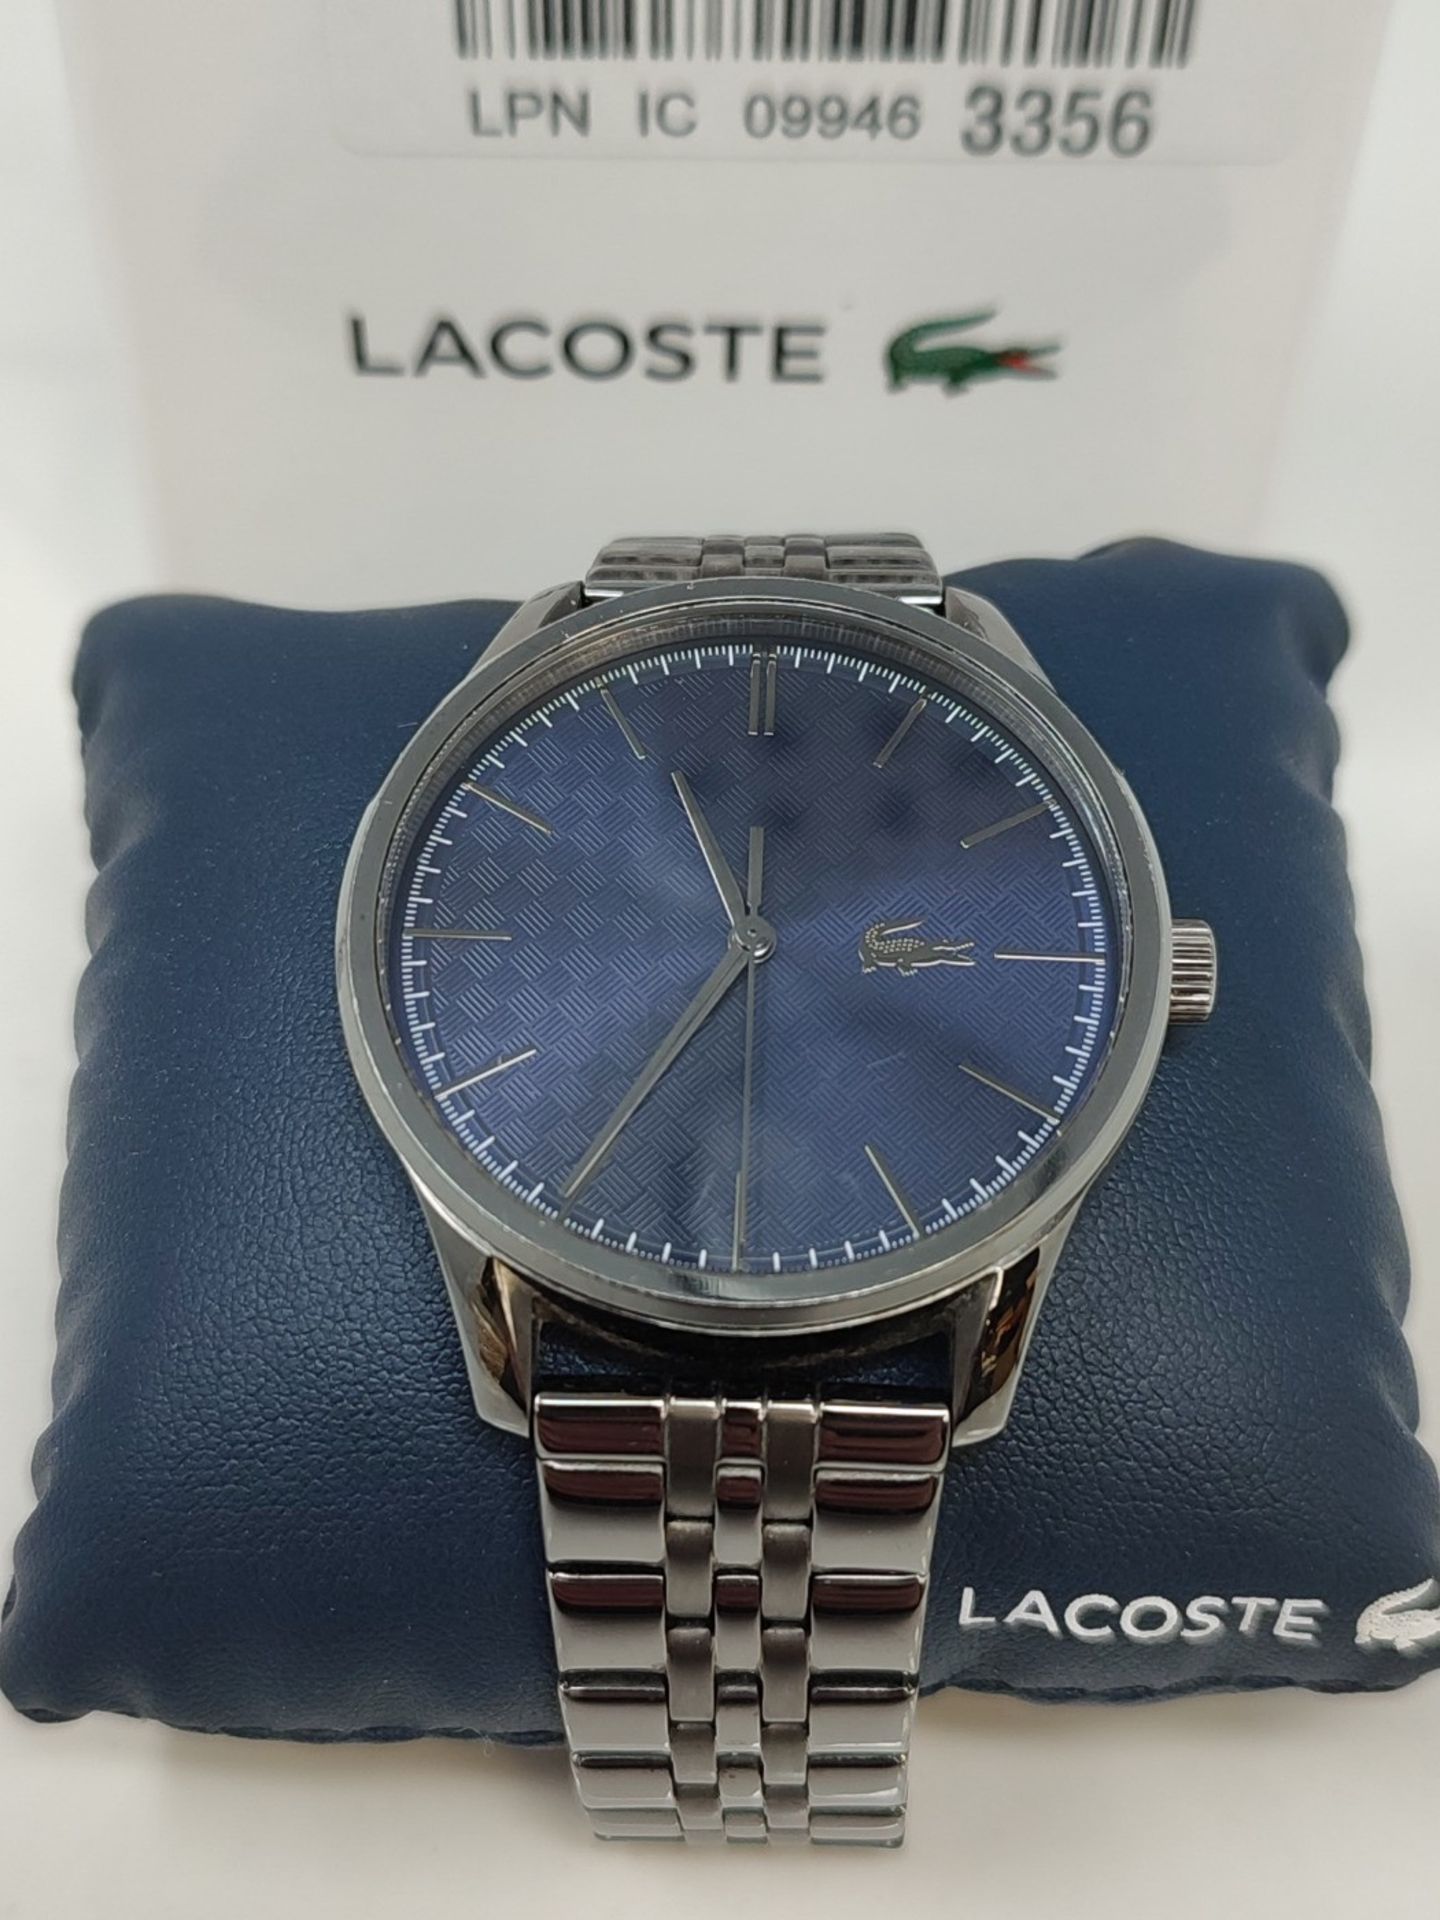 RRP £143.00 Lacoste Men's Quartz Analog Watch with Grey Stainless Steel Bracelet - 2011191 - Image 2 of 3